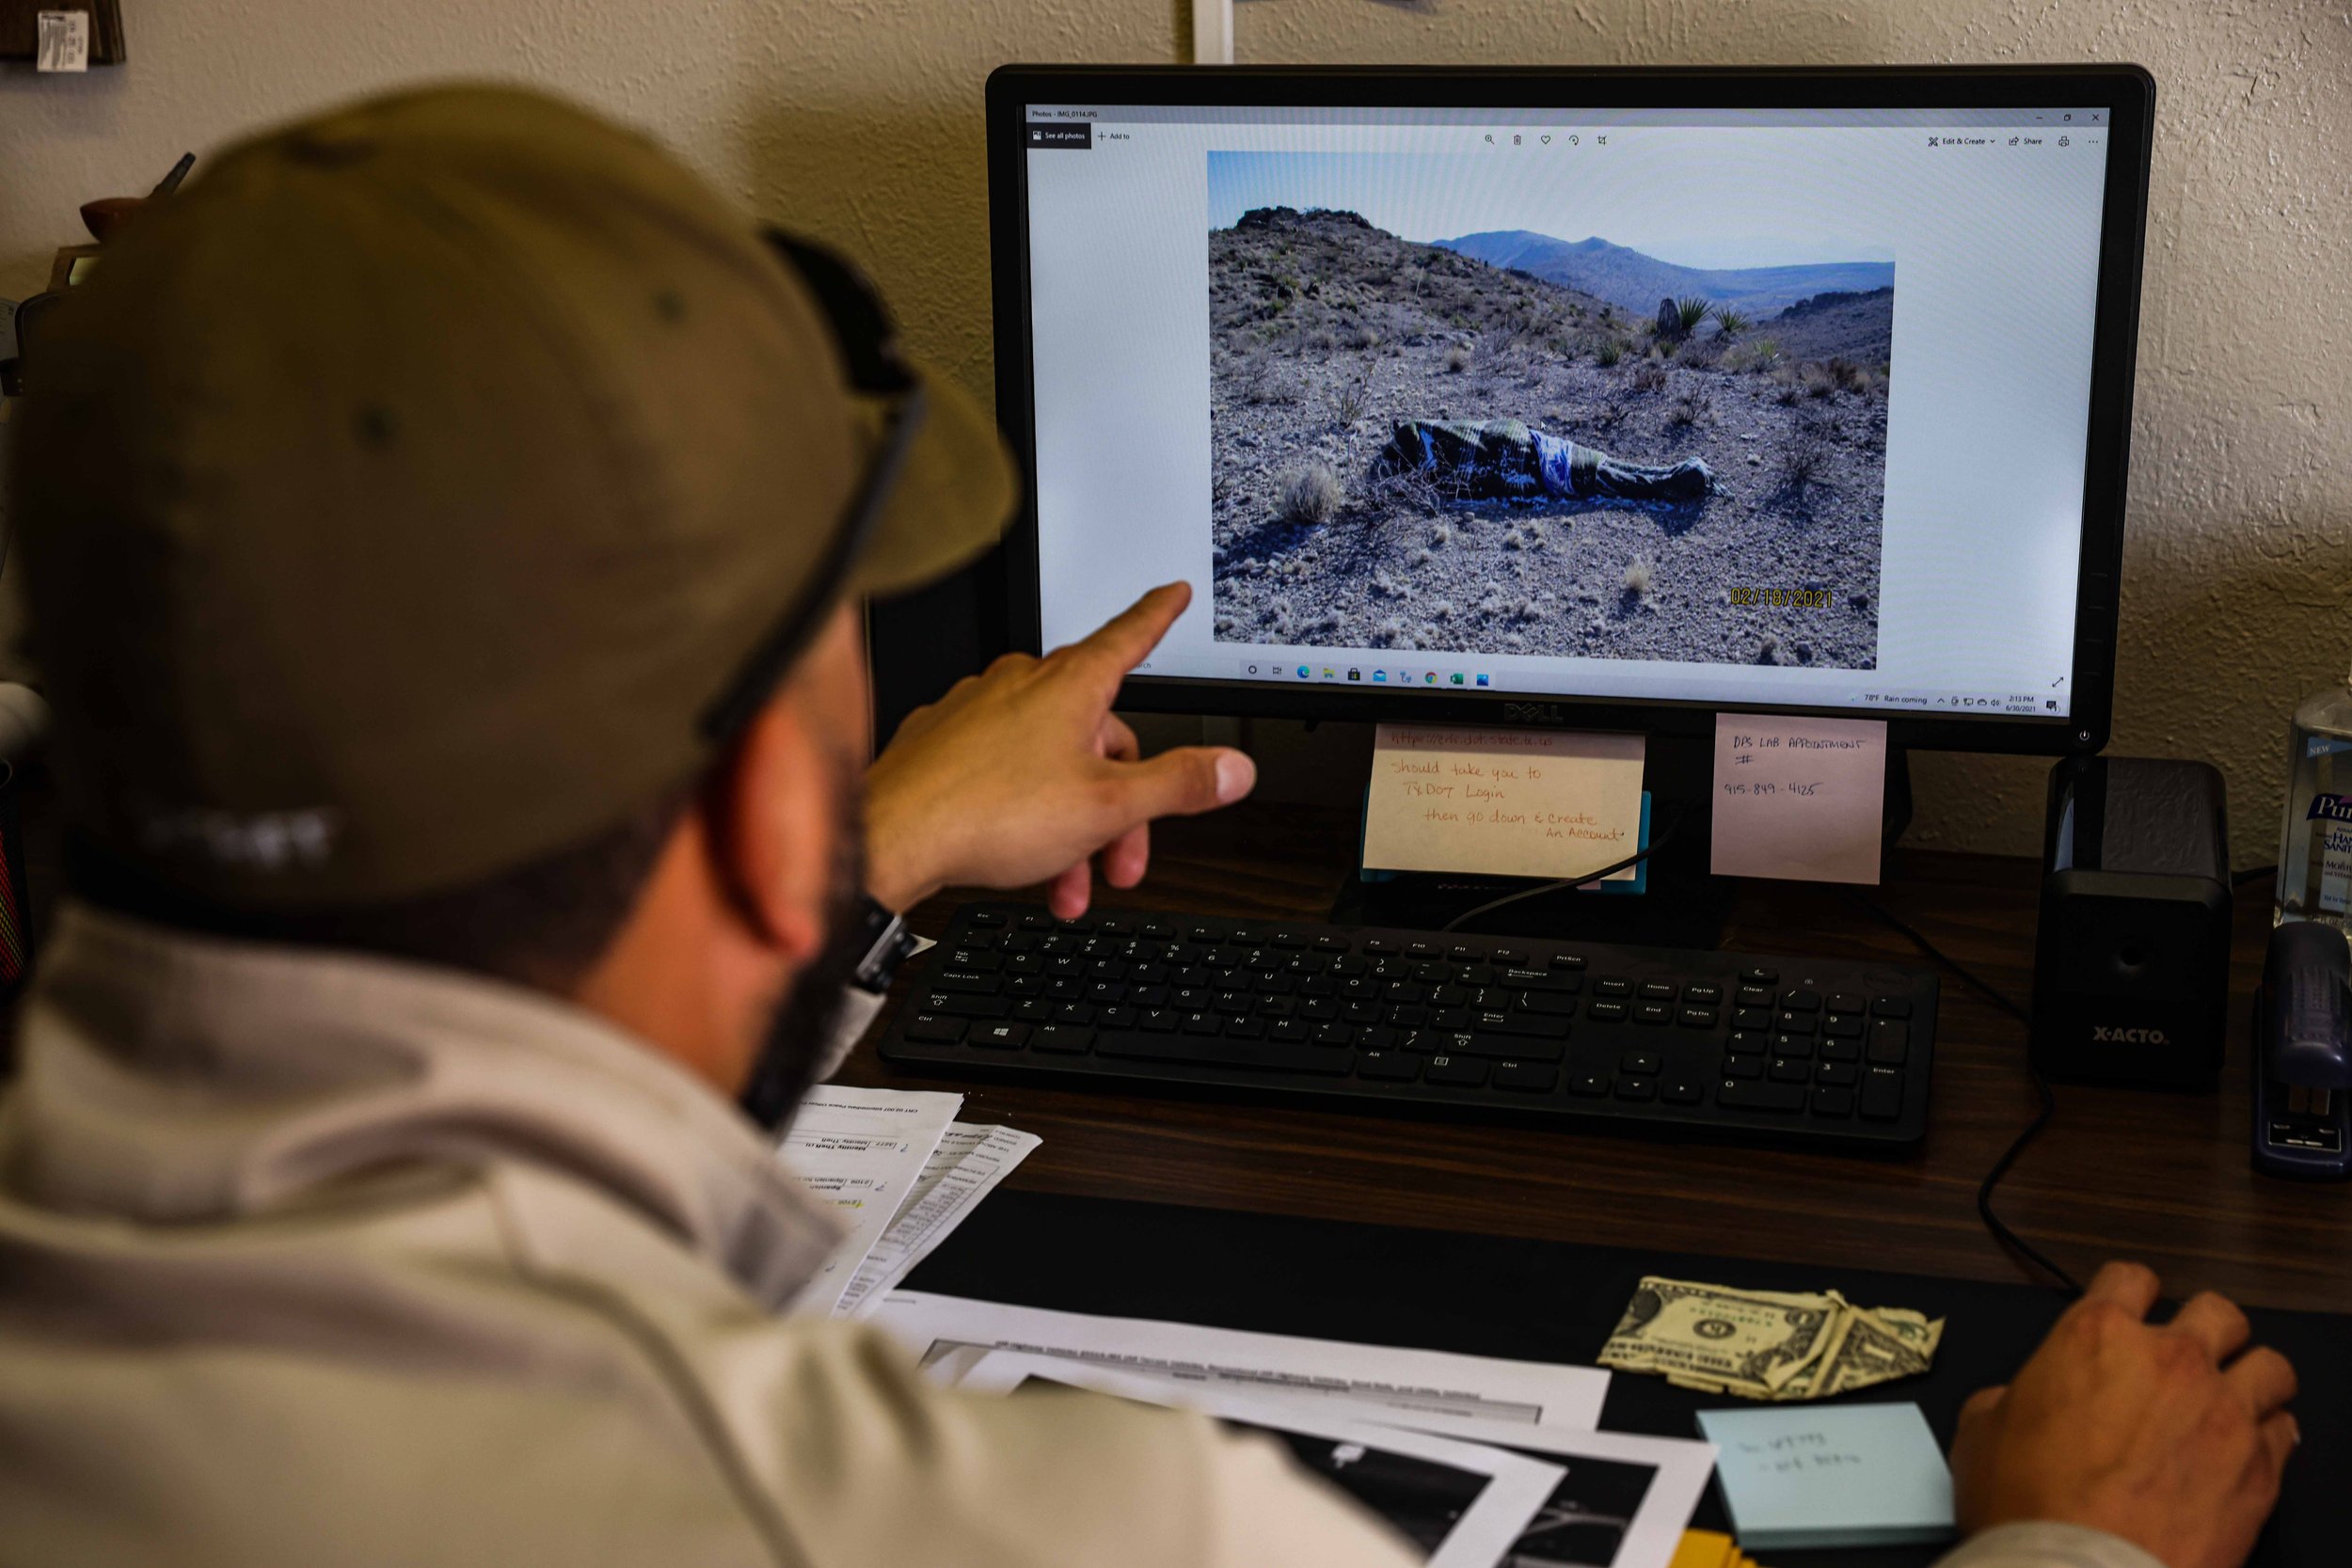  Culberson County Chief Deputy Joseph Corrales shows a photo of the body of an undocumented migrant found in the Texas desert within the vicinity of Culberson County in Van Horn, Texas on Wednesday, June 30, 2021. 